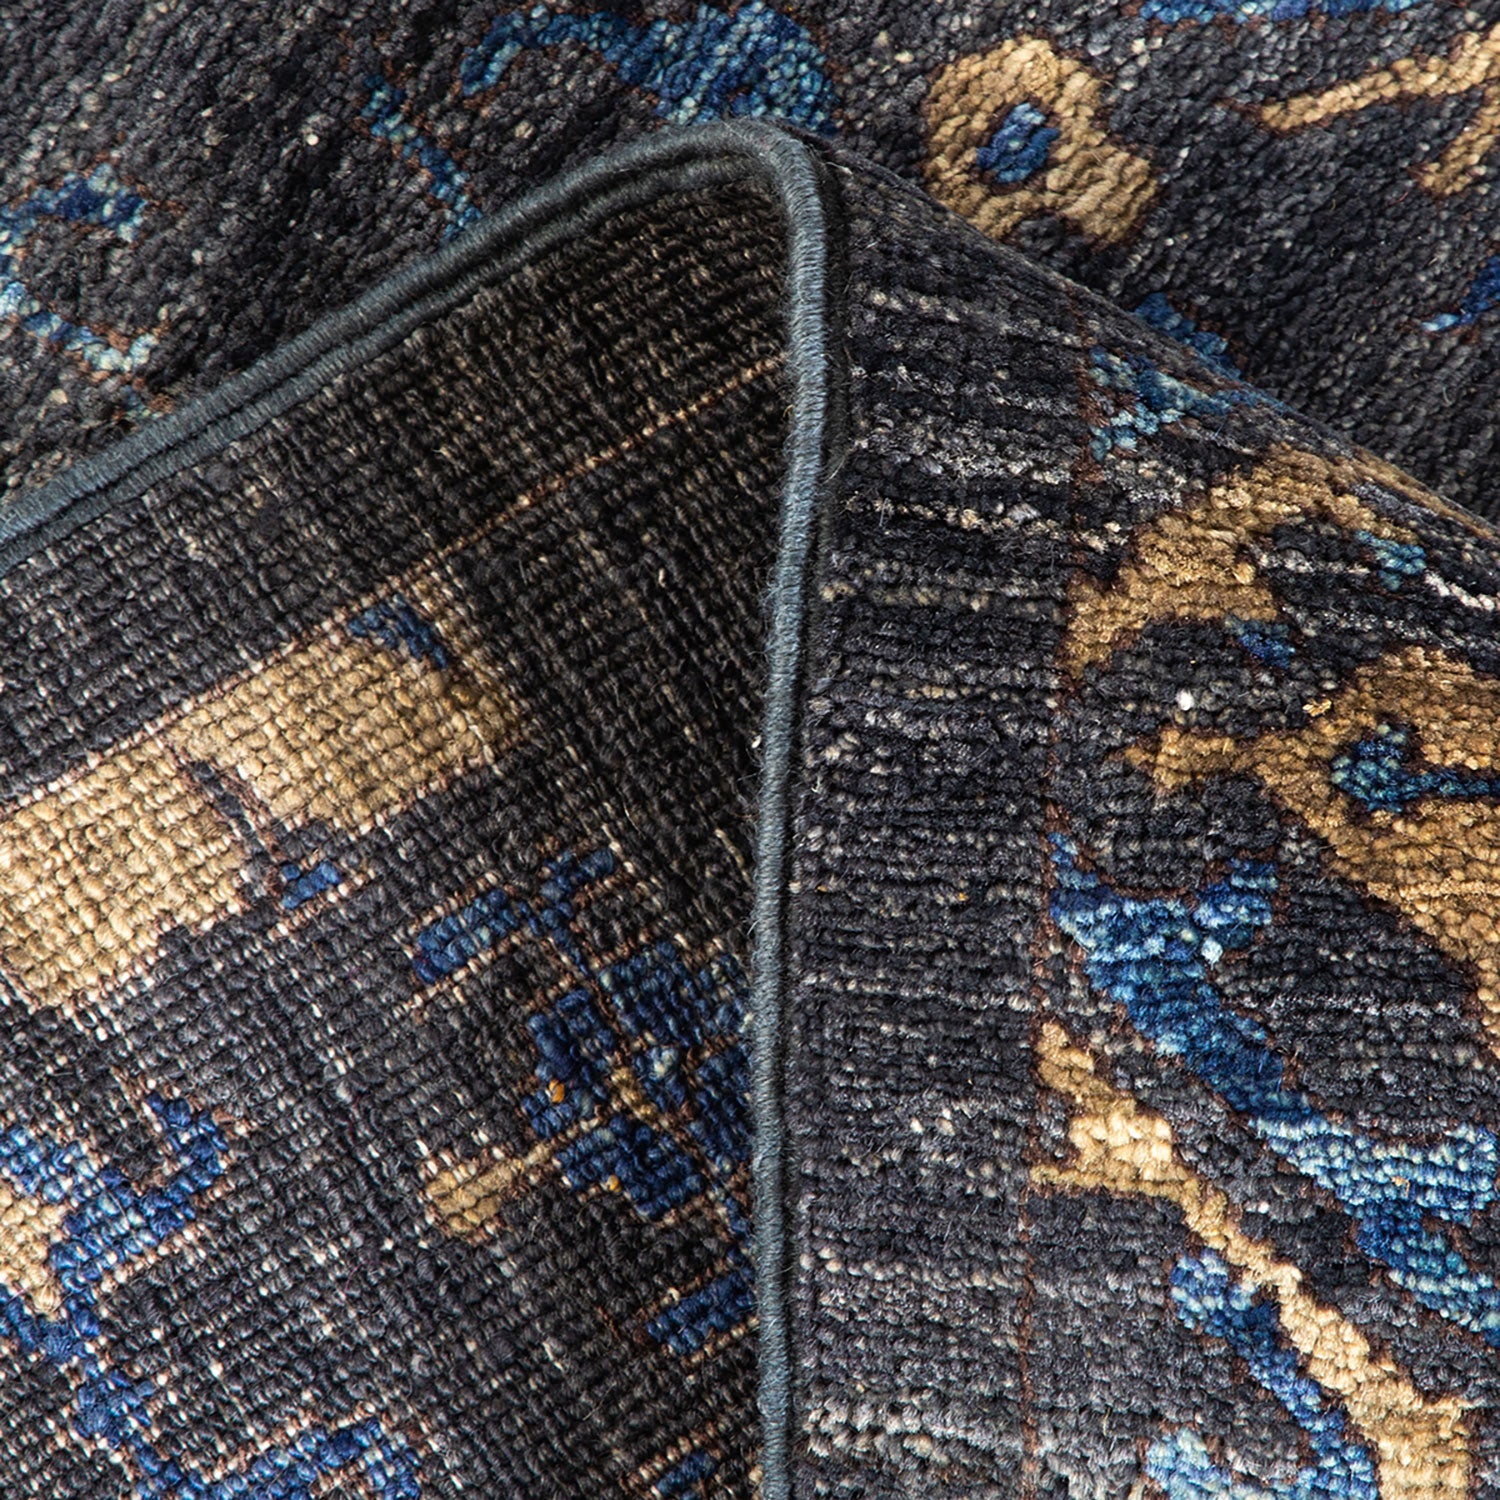 Close-up image of textured fabric with intricate blue pattern and visible seam.